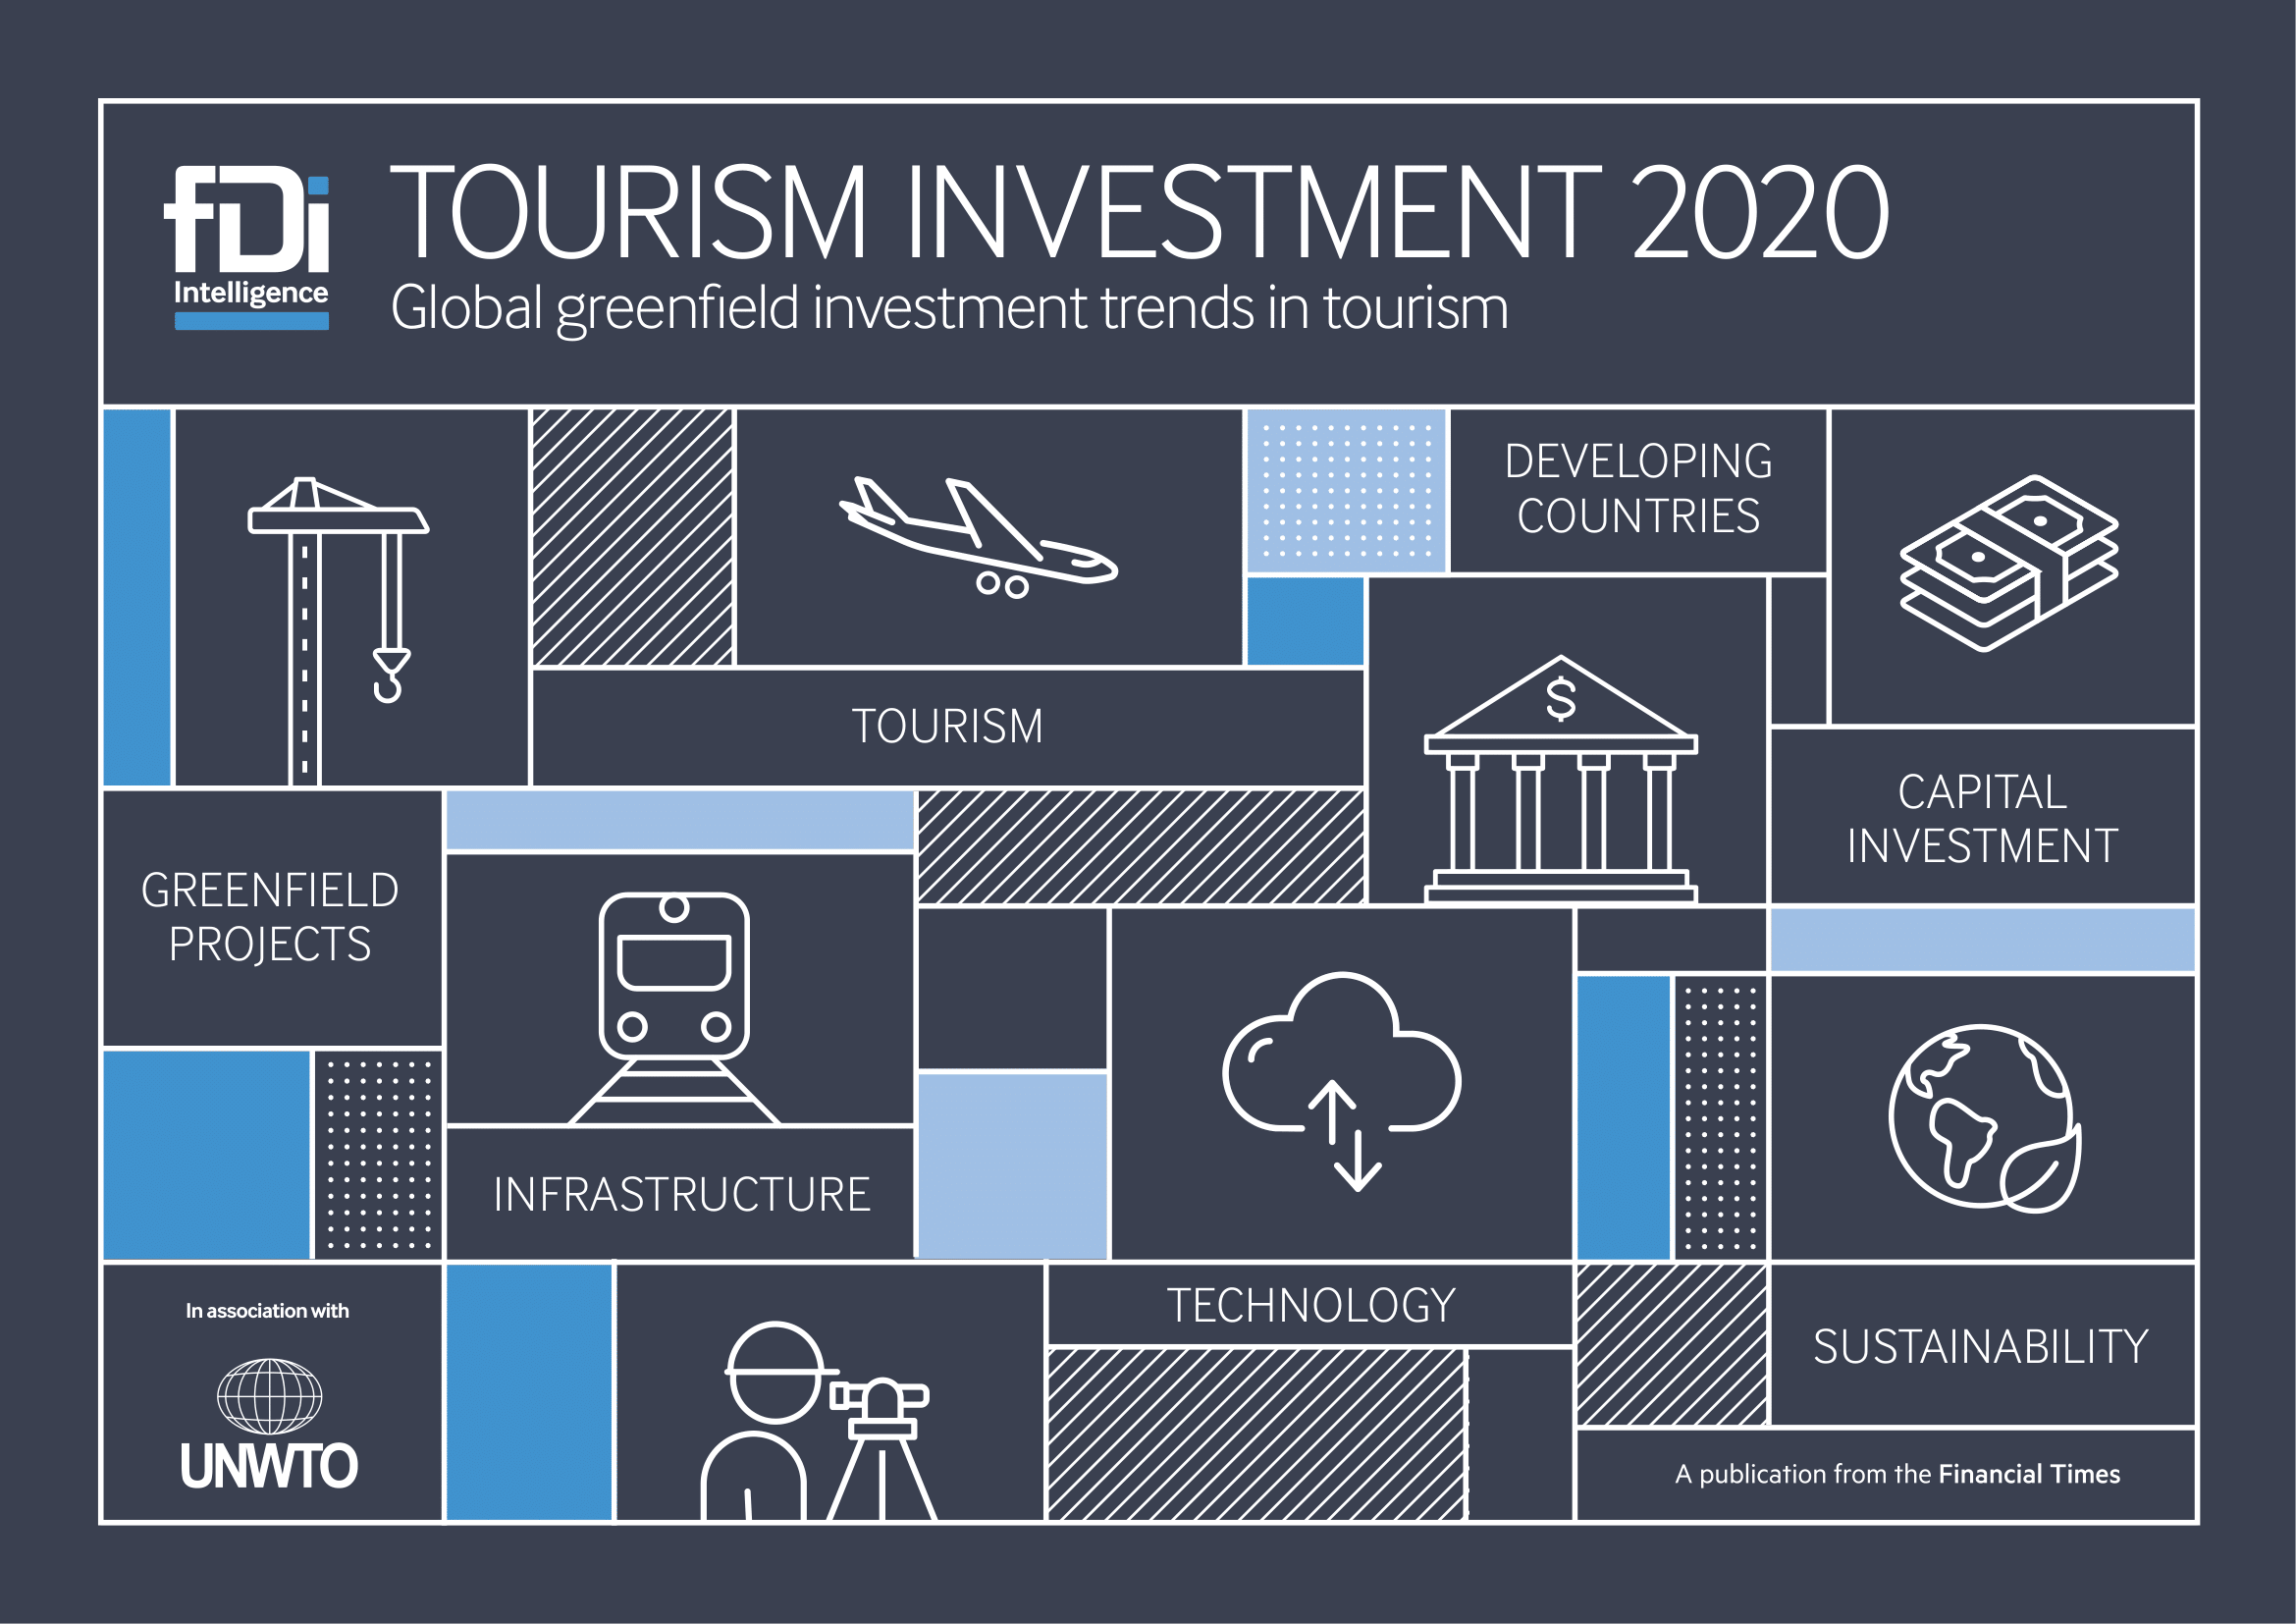 tourism investment incentives